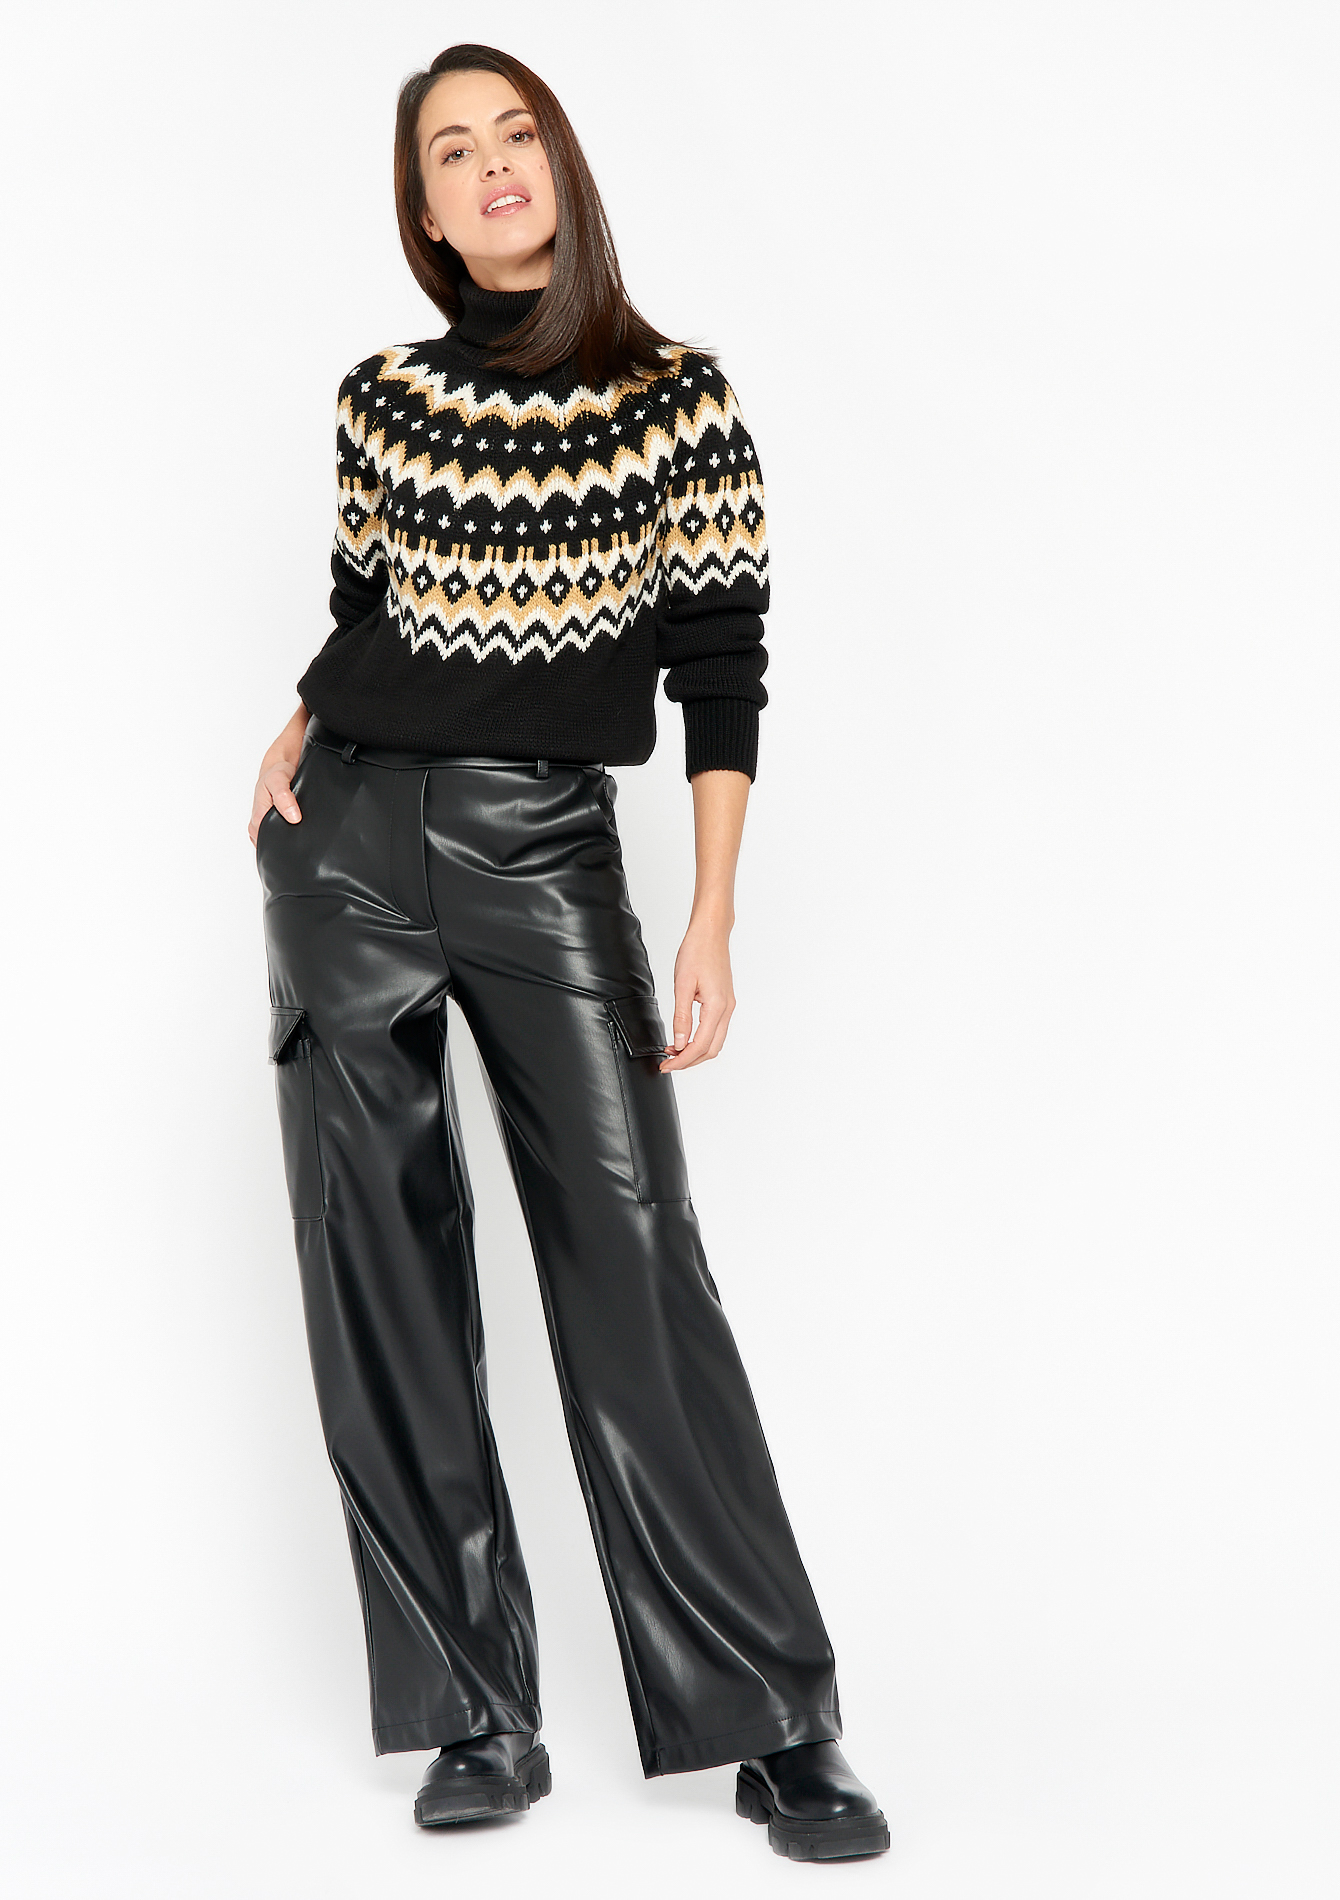 Drainpipe trousers in imitation leather | marc-cain.com/en